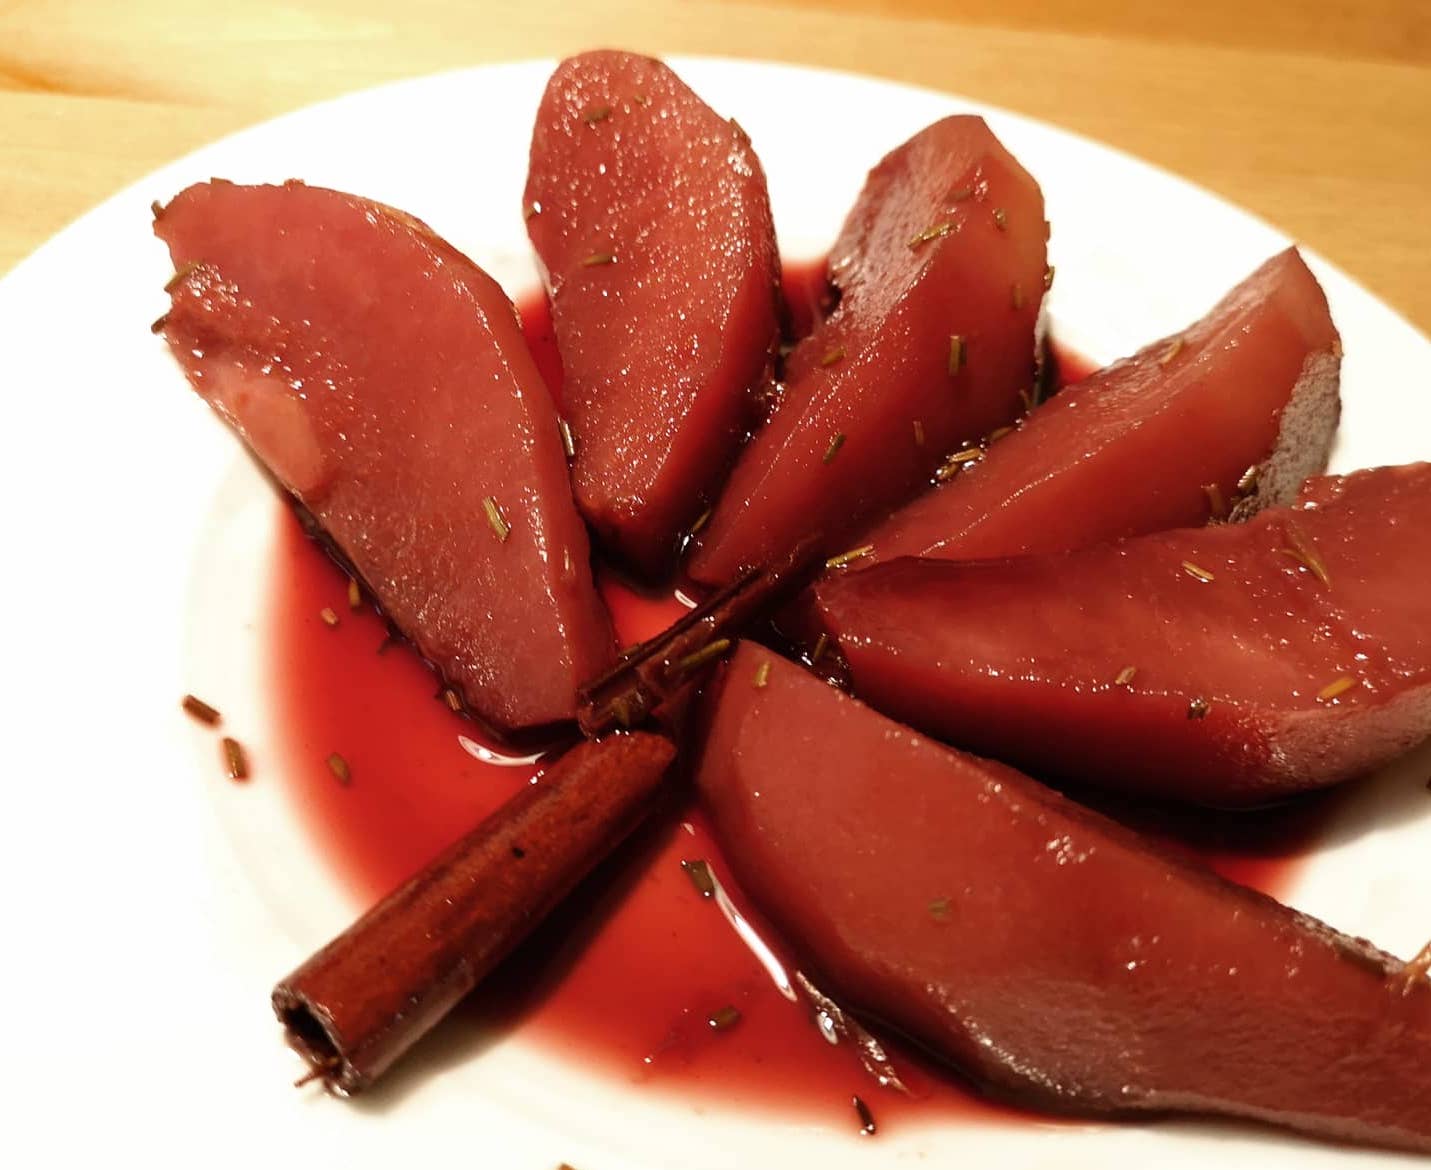 Red wine poached pear | 红酒炖梨